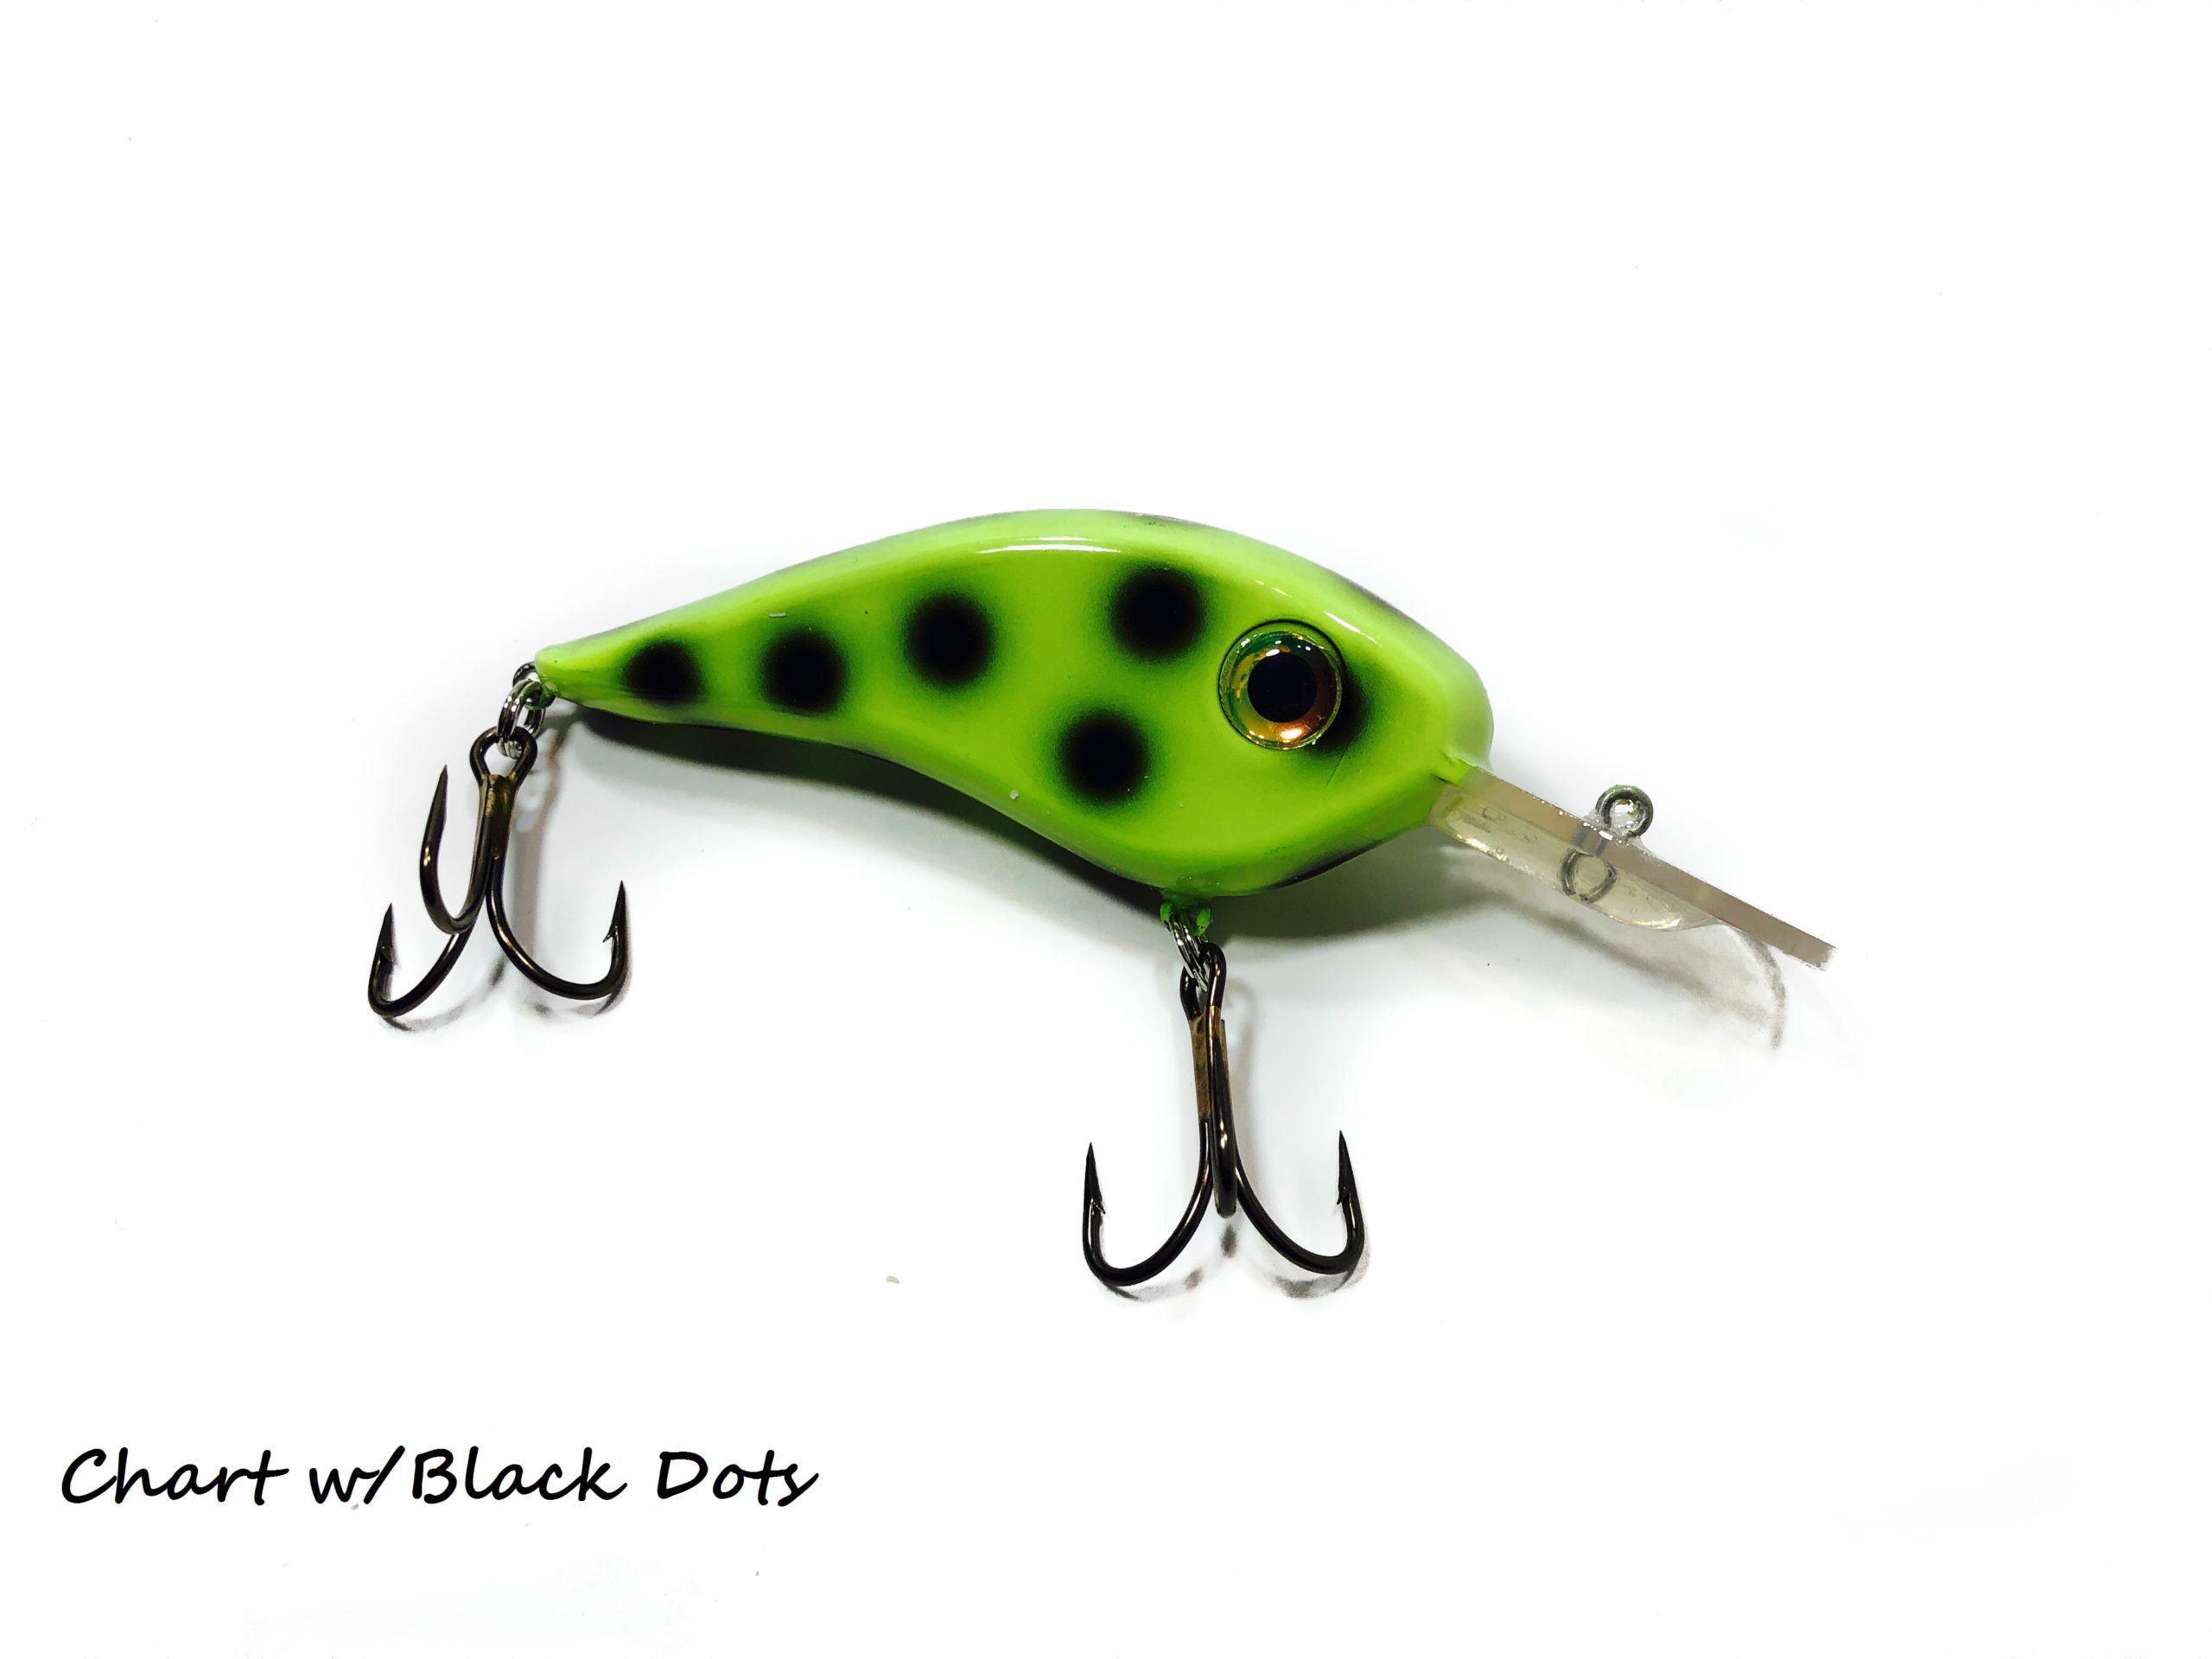 https://www.llungenlures.com/wp-content/uploads/Chad-Shad-Chart-w-Blk-Dots-scaled.jpg